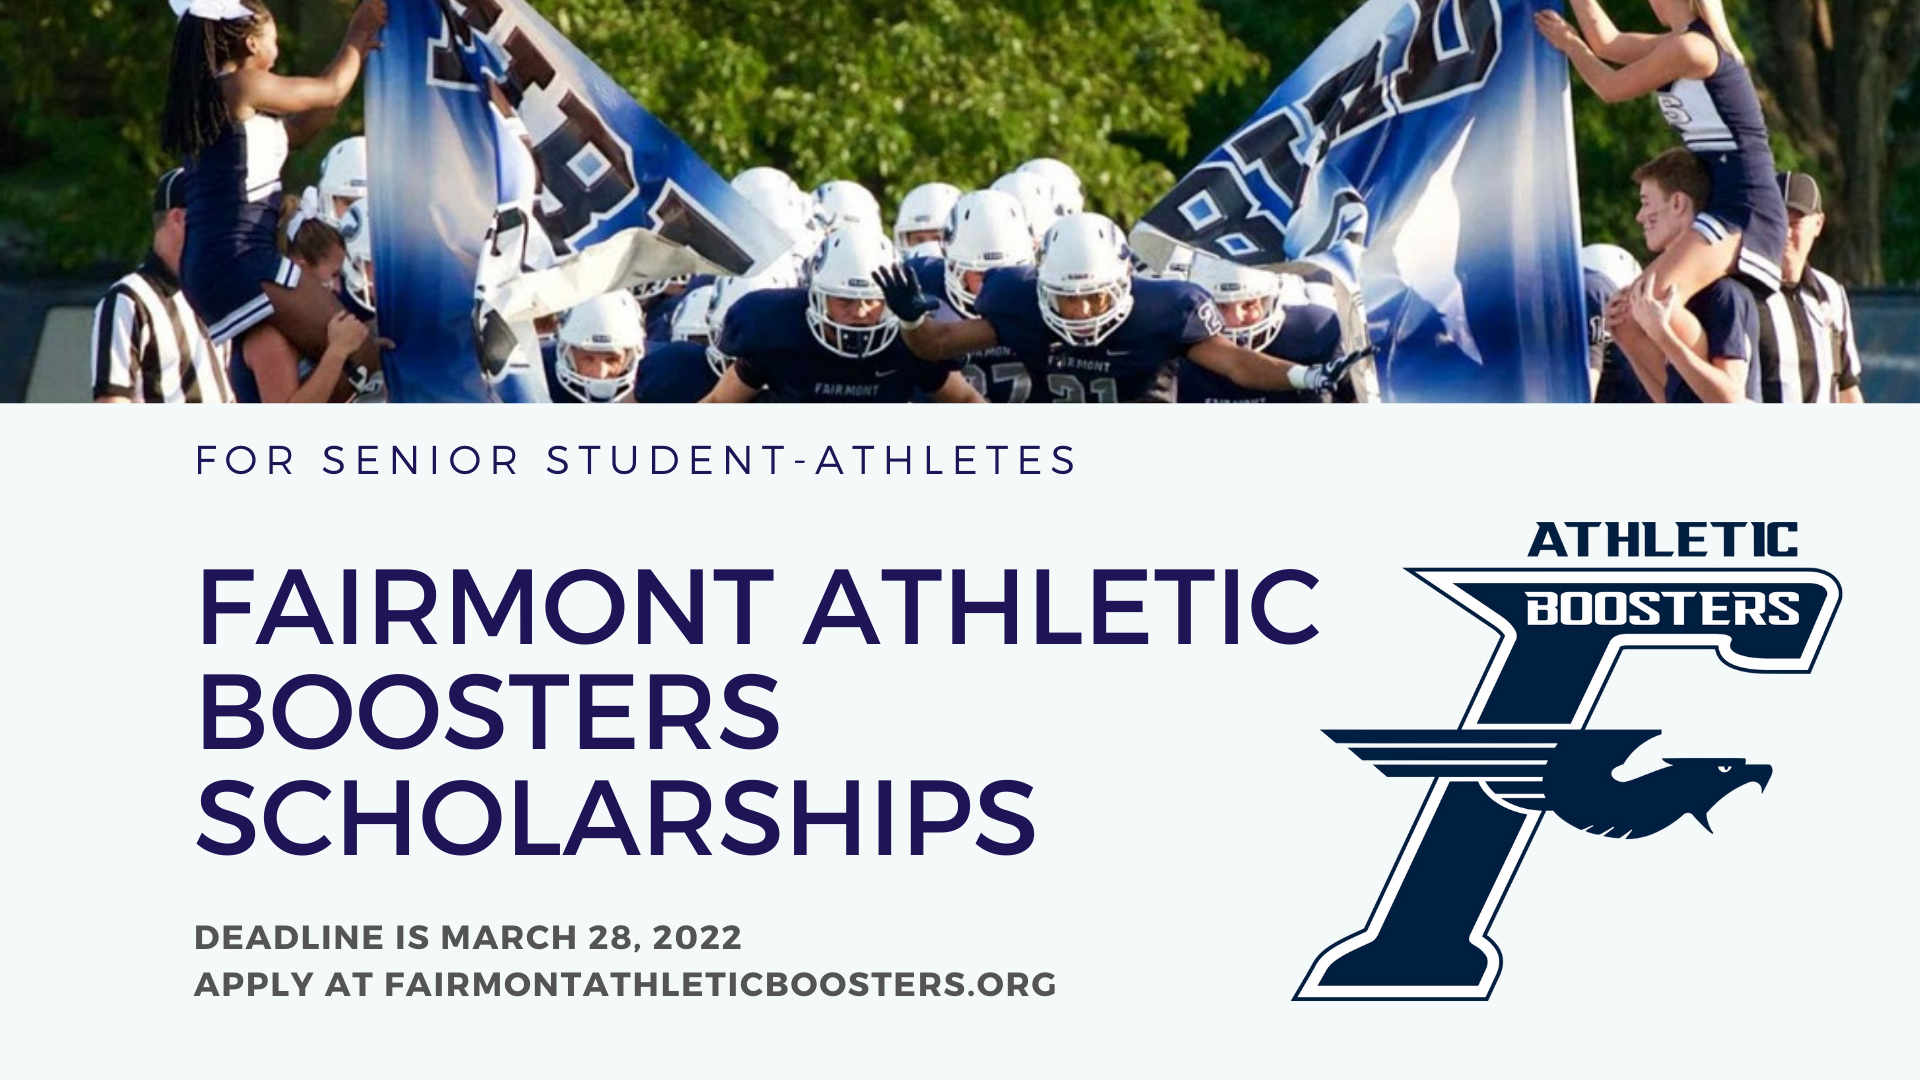 Fairmont Athletic Booster Scholarships to be Awarded